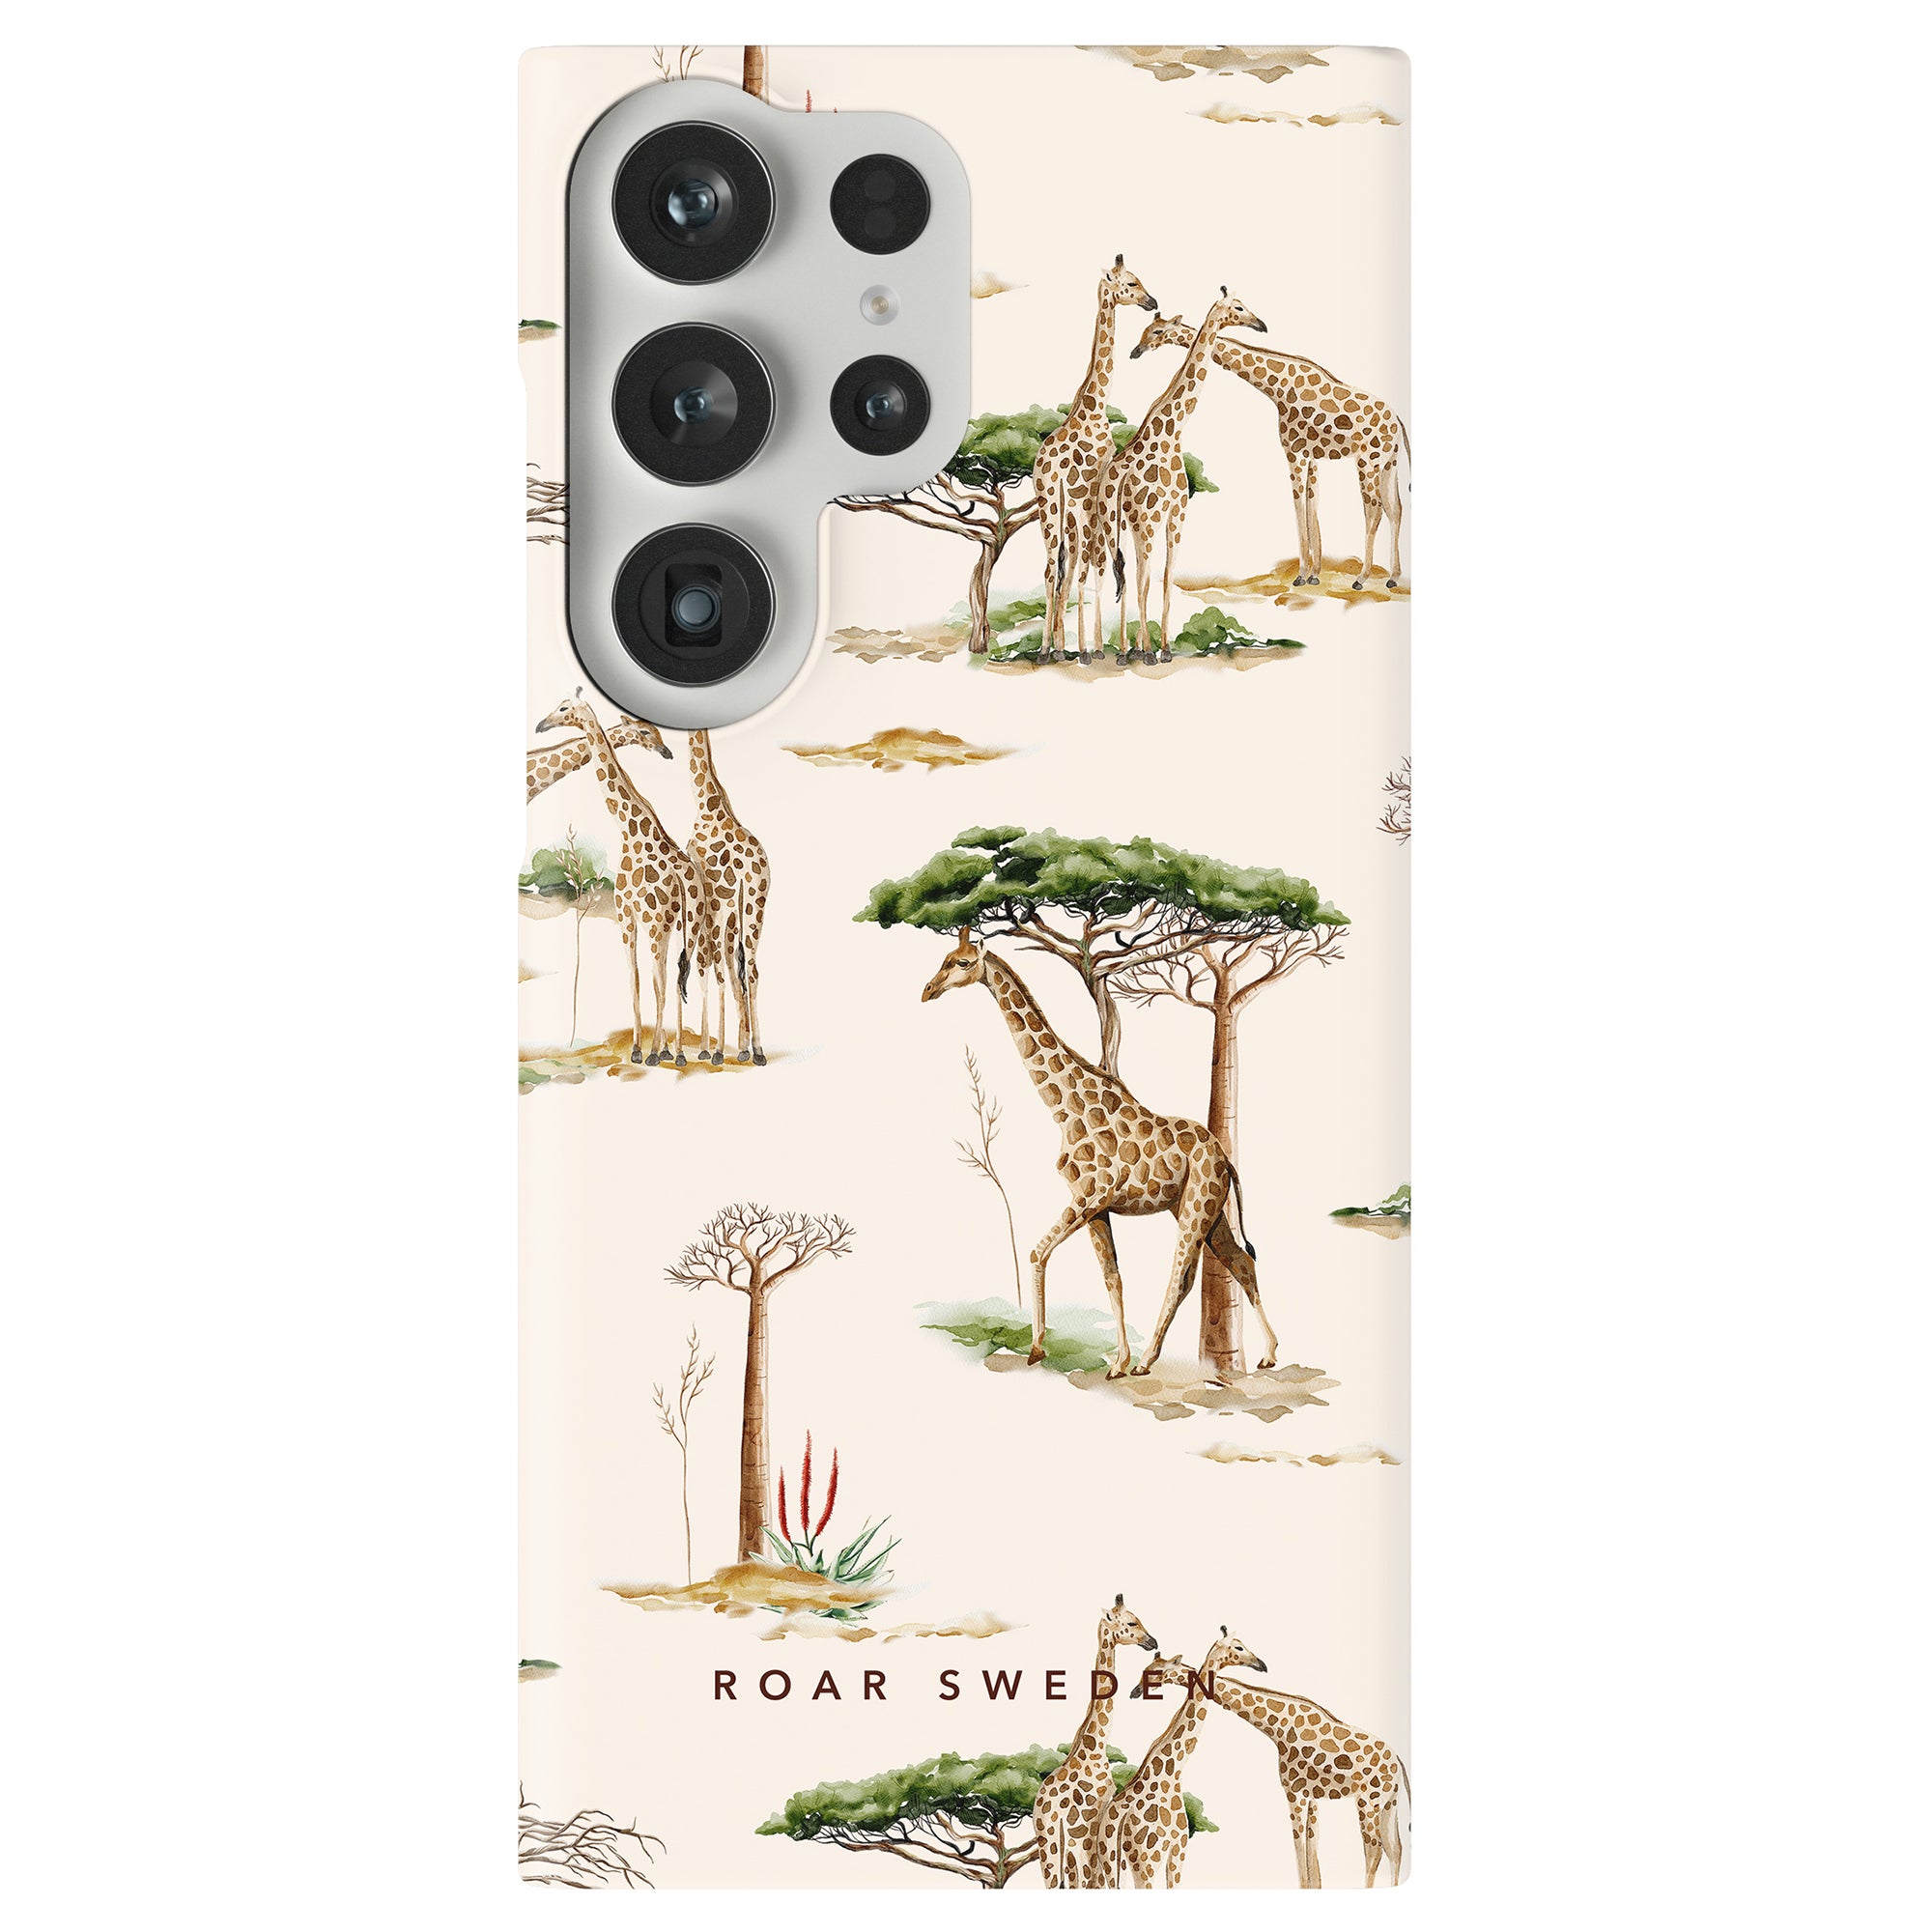 A phone case from the Safari Collection featuring an illustration of multiple giraffes standing and grazing among trees, with the text "ROAR SWEDEN" at the bottom. The Giraffa - Slim case offers excellent skydd mot repor och stötar.